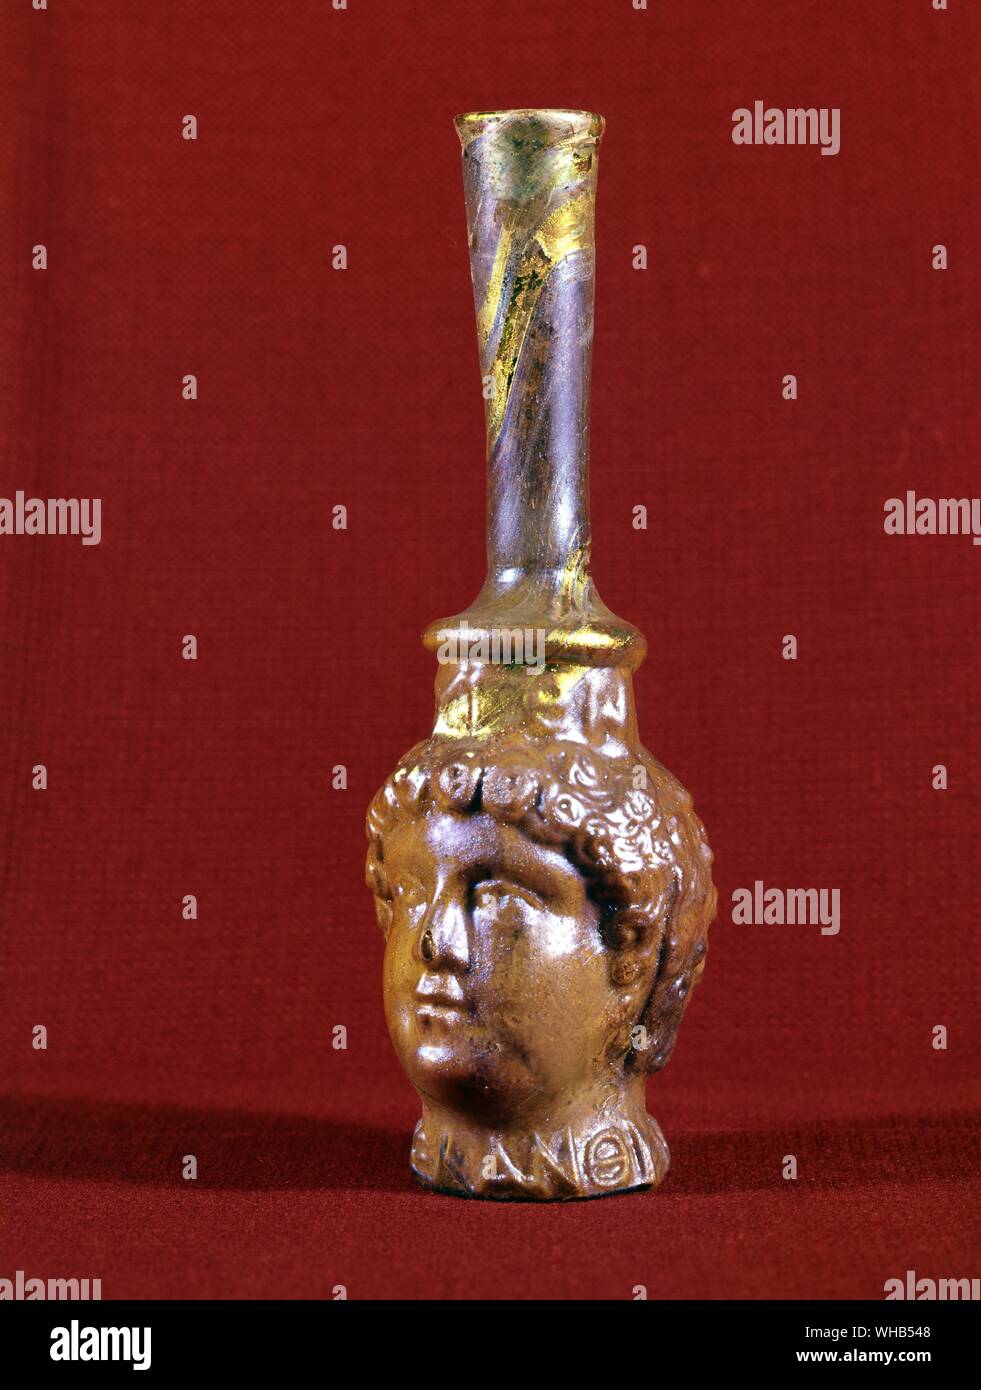 Greek Head with vase protruding from the top. Stock Photo